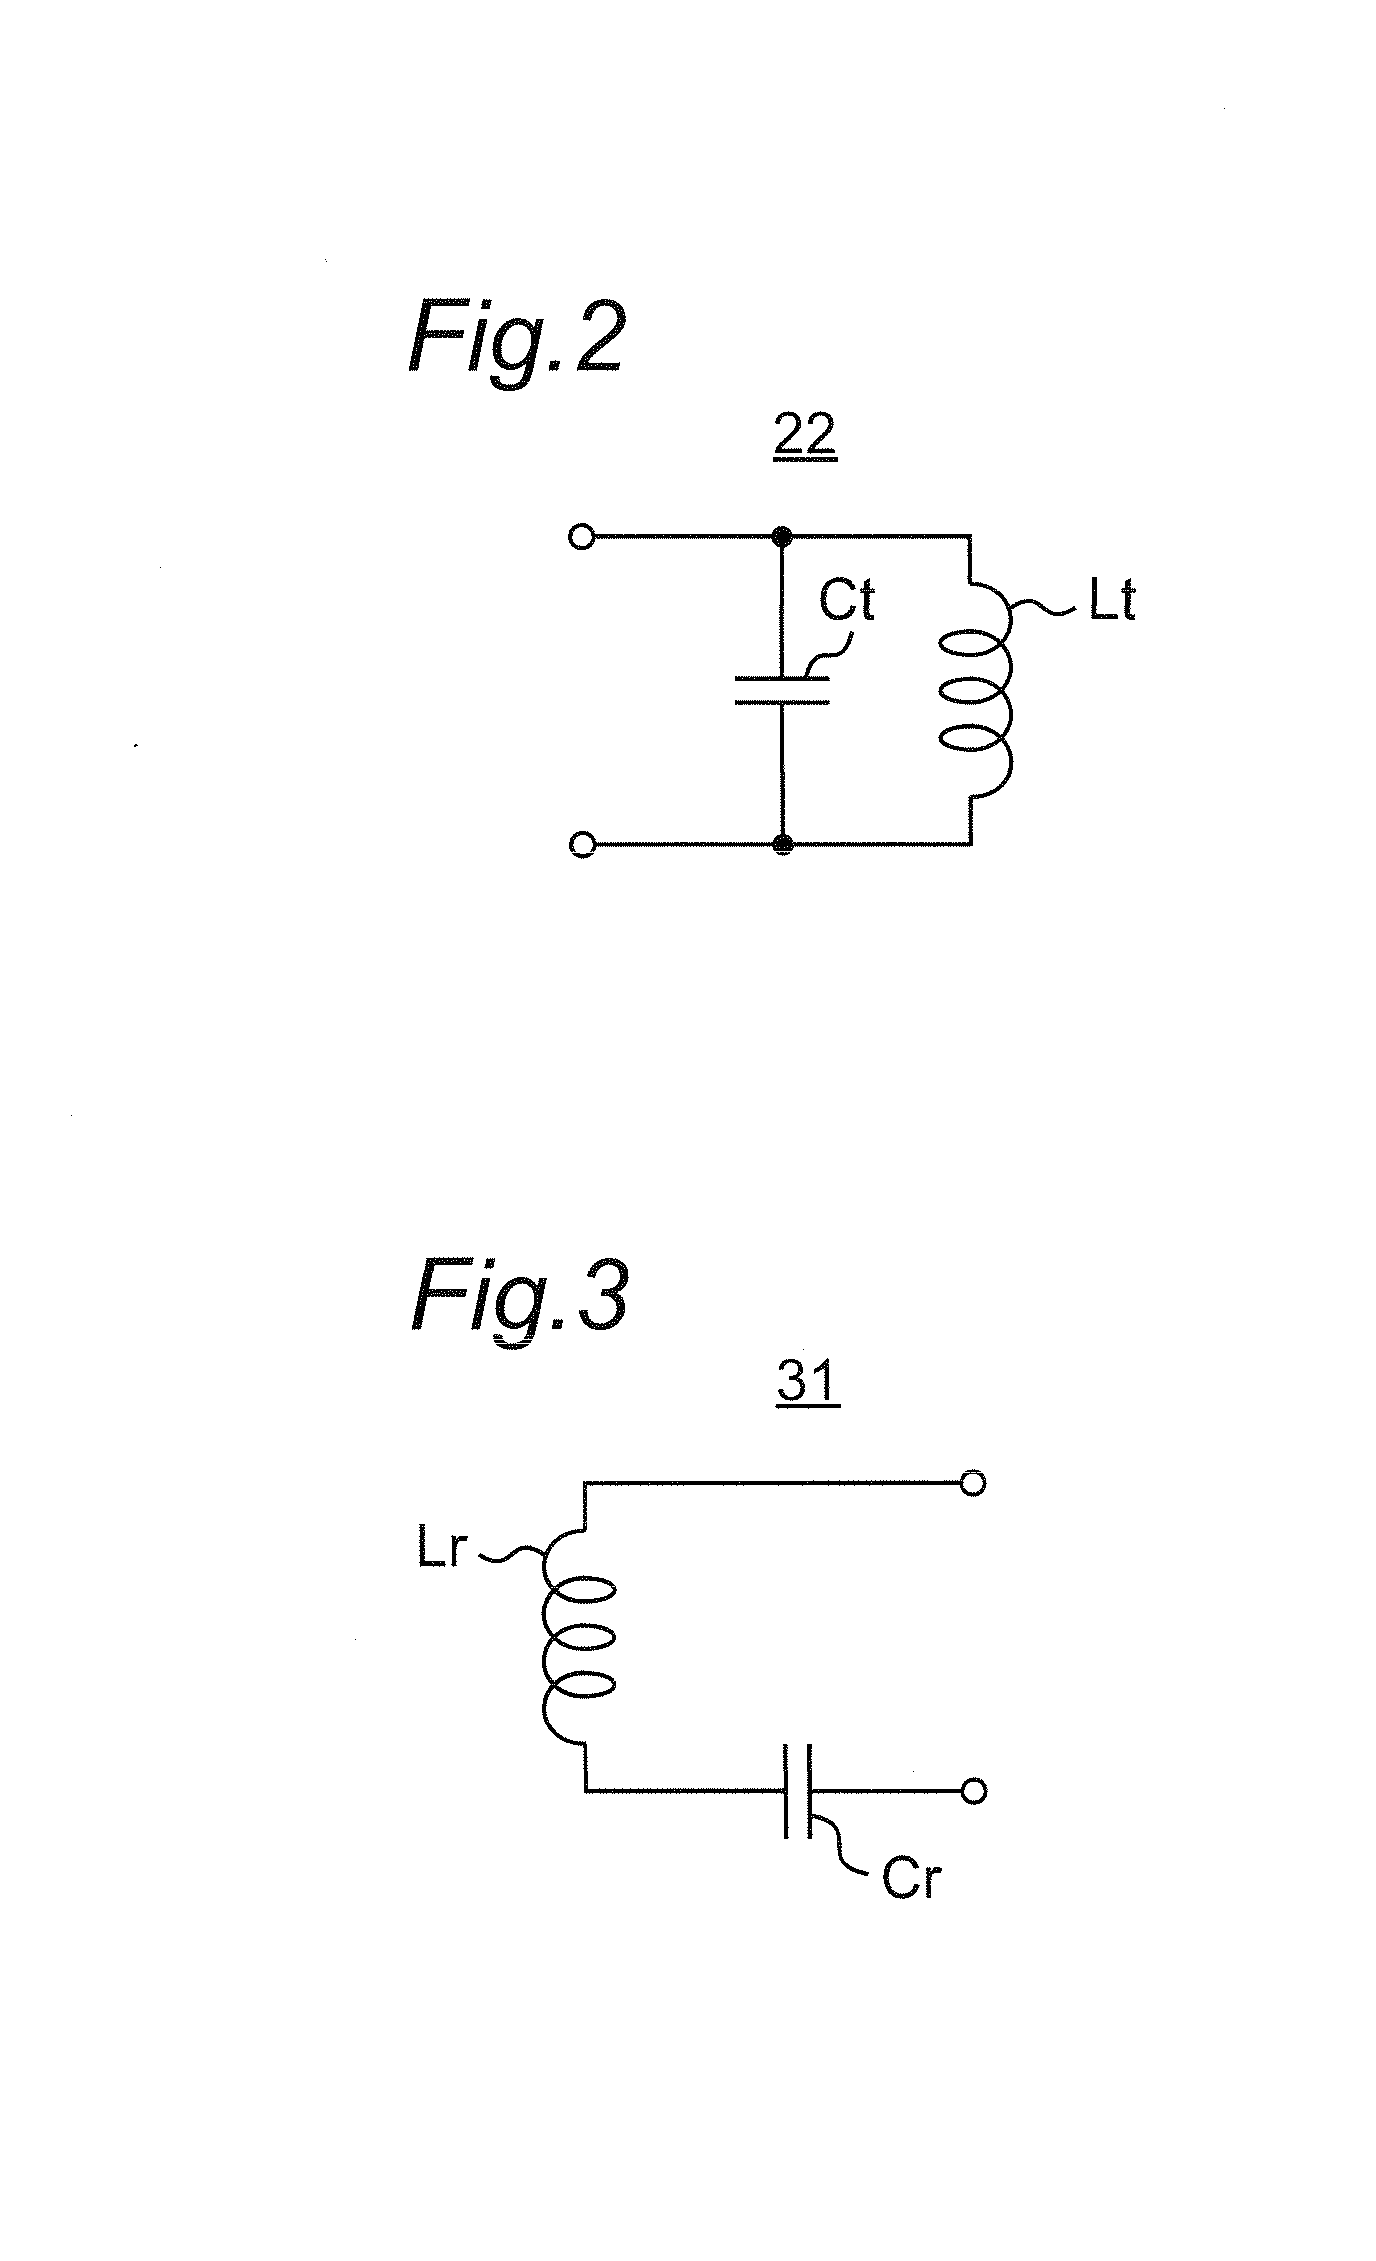 Wireless power transmission system capable of continuing power transmission while suppressing heatup of foreign objects